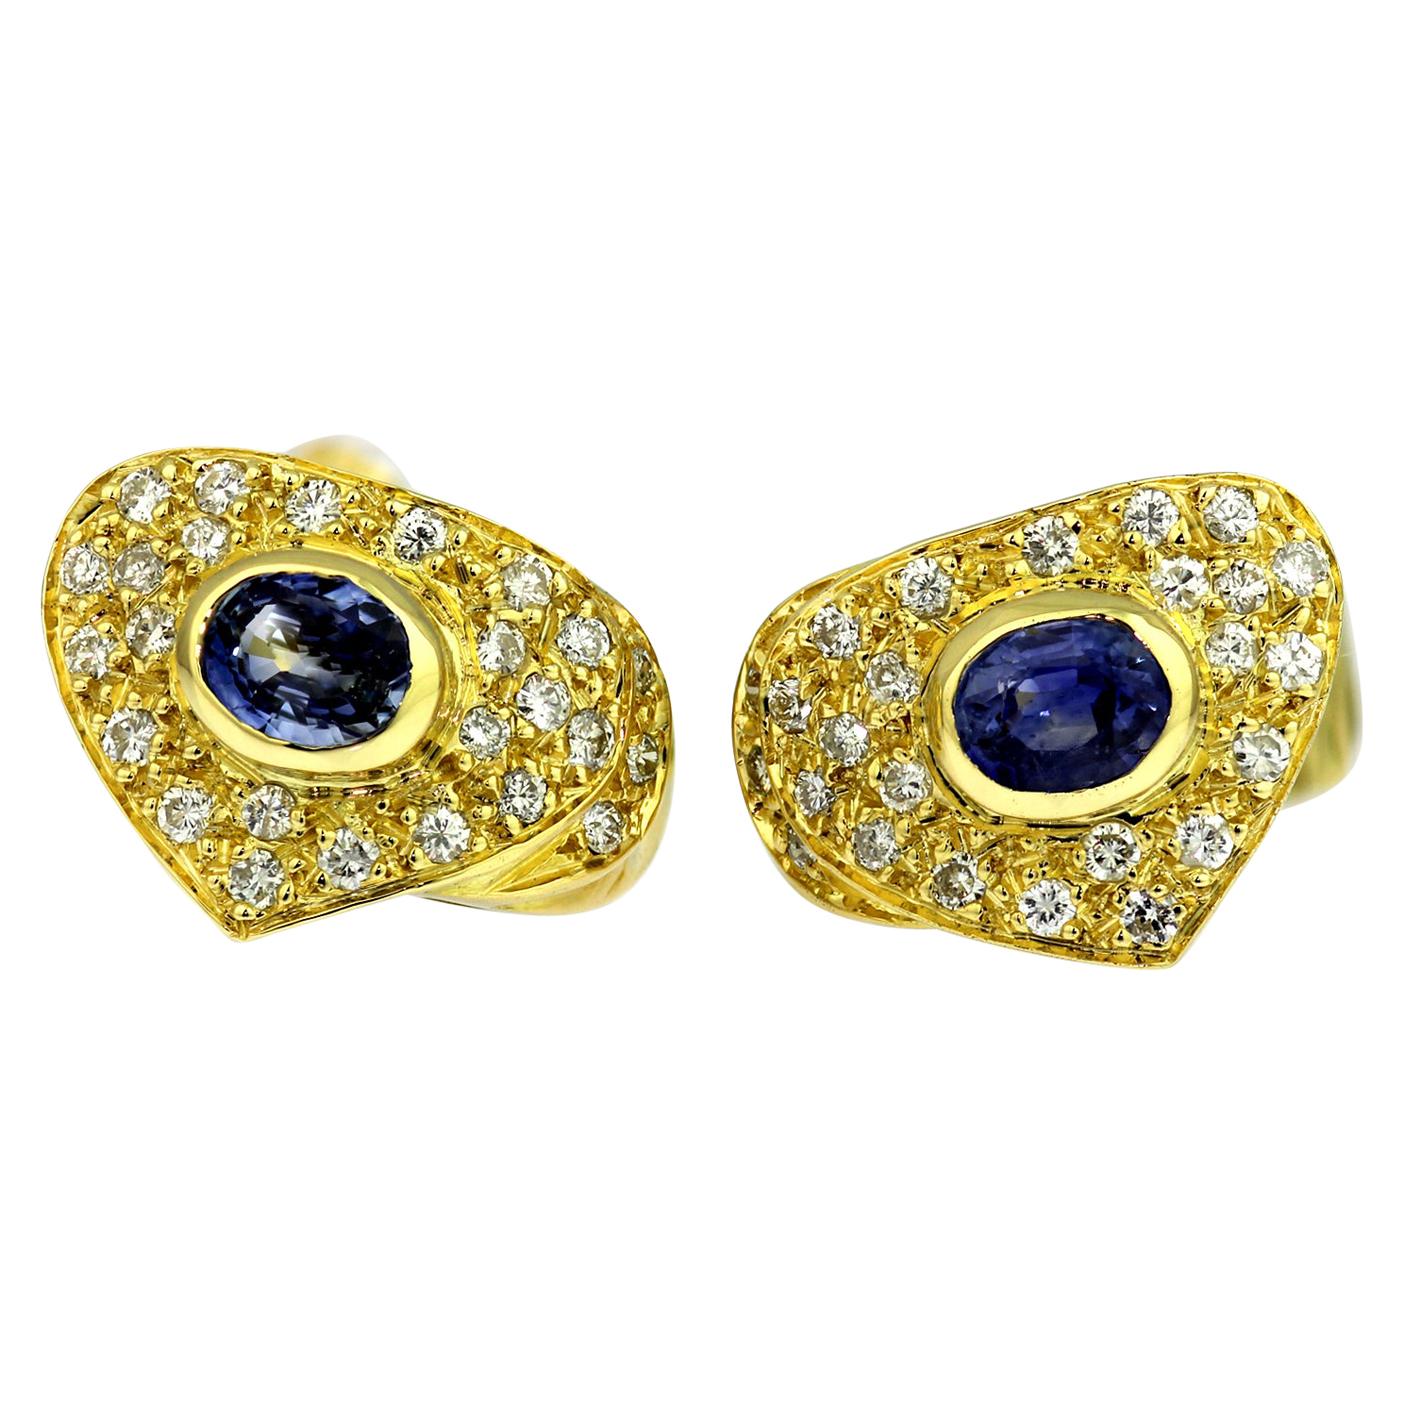 Pair of Clip-On Earrings with Sapphire and Diamonds in 18 Carat Gold